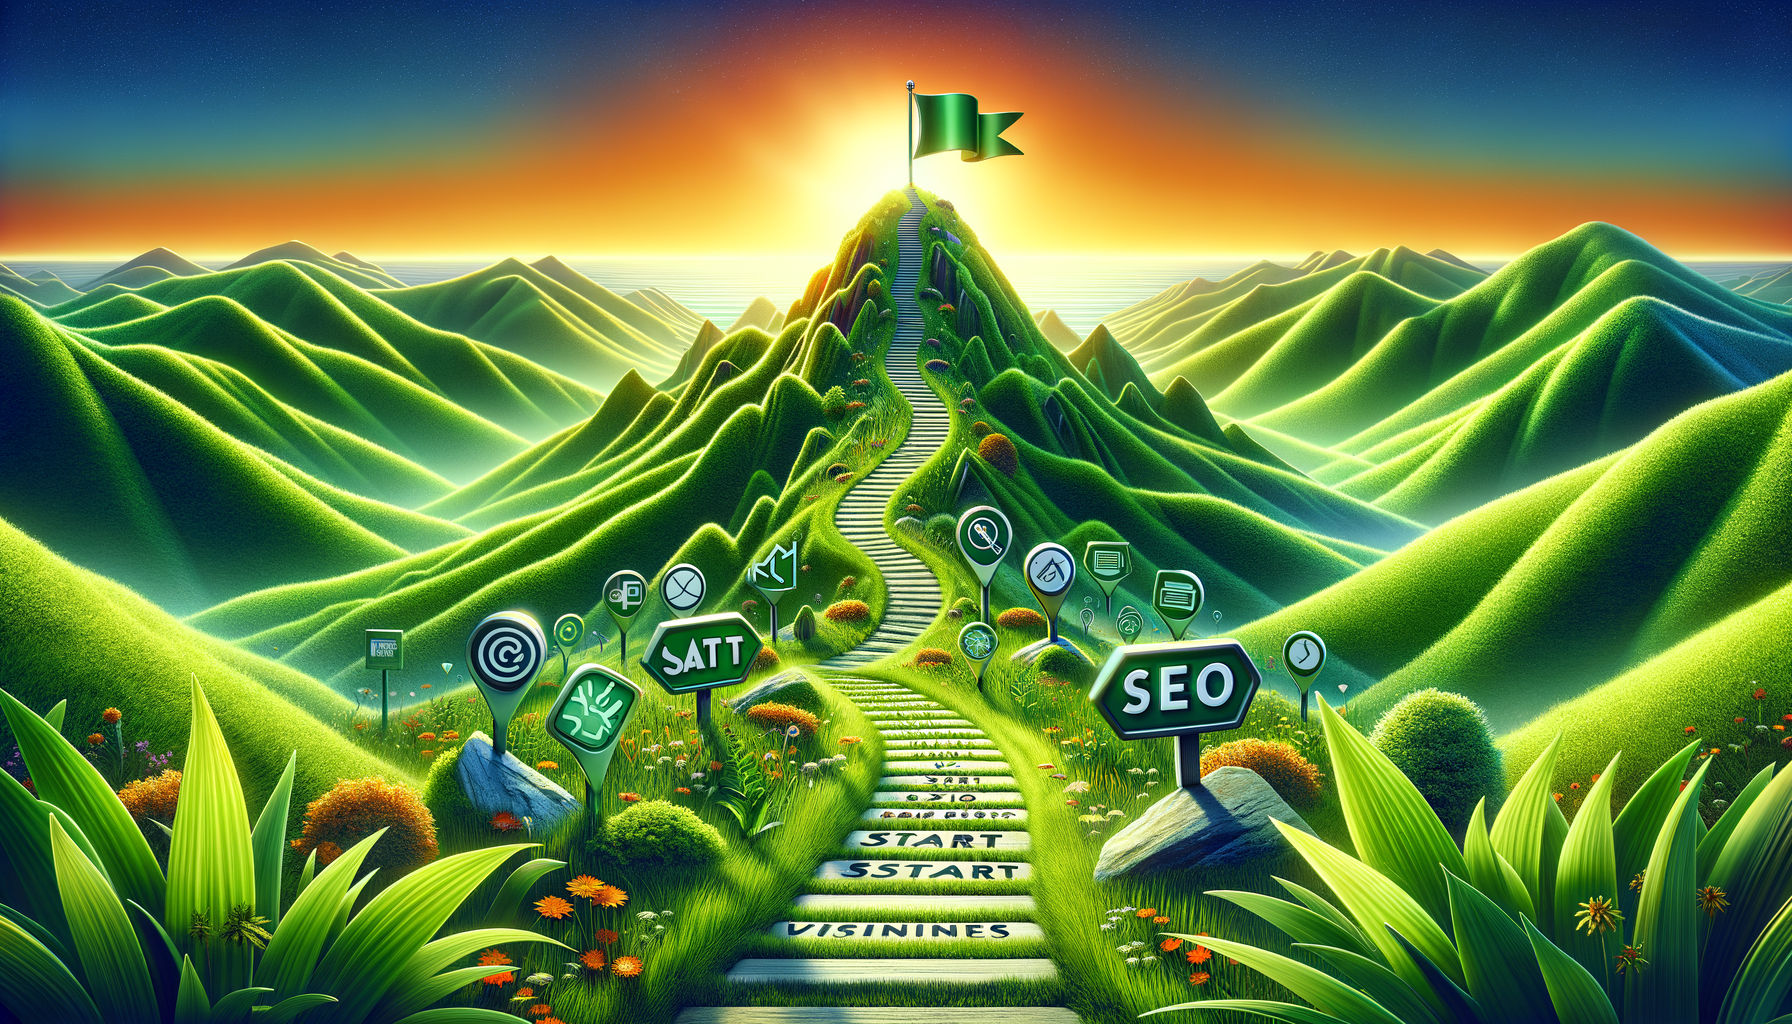 SEO Journey to Visibility and Brand Growth